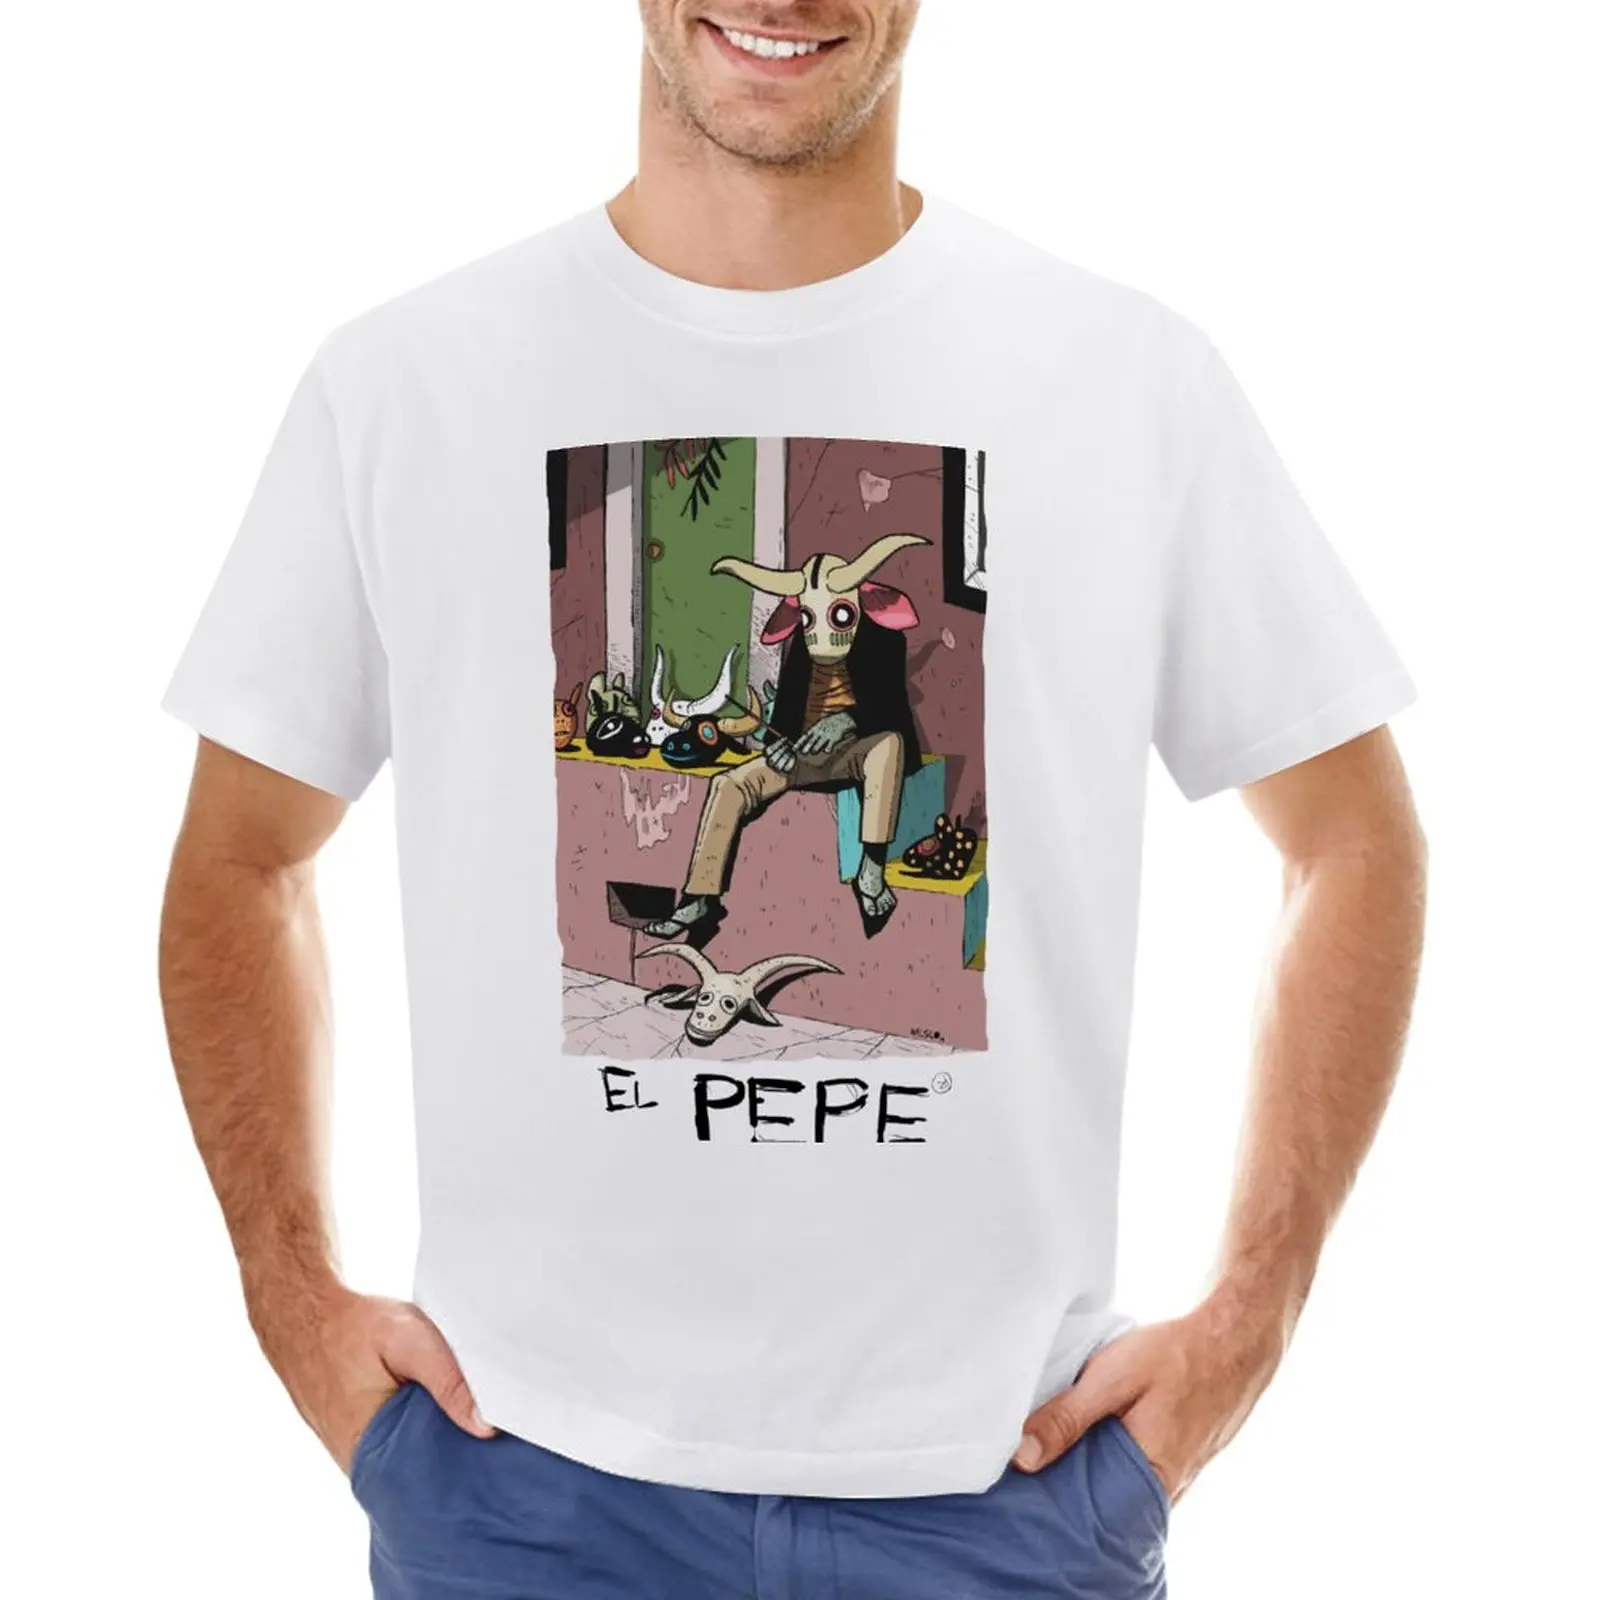 

EL PEPE by Nalsco T-Shirt aesthetic clothes blanks plus sizes mens clothing